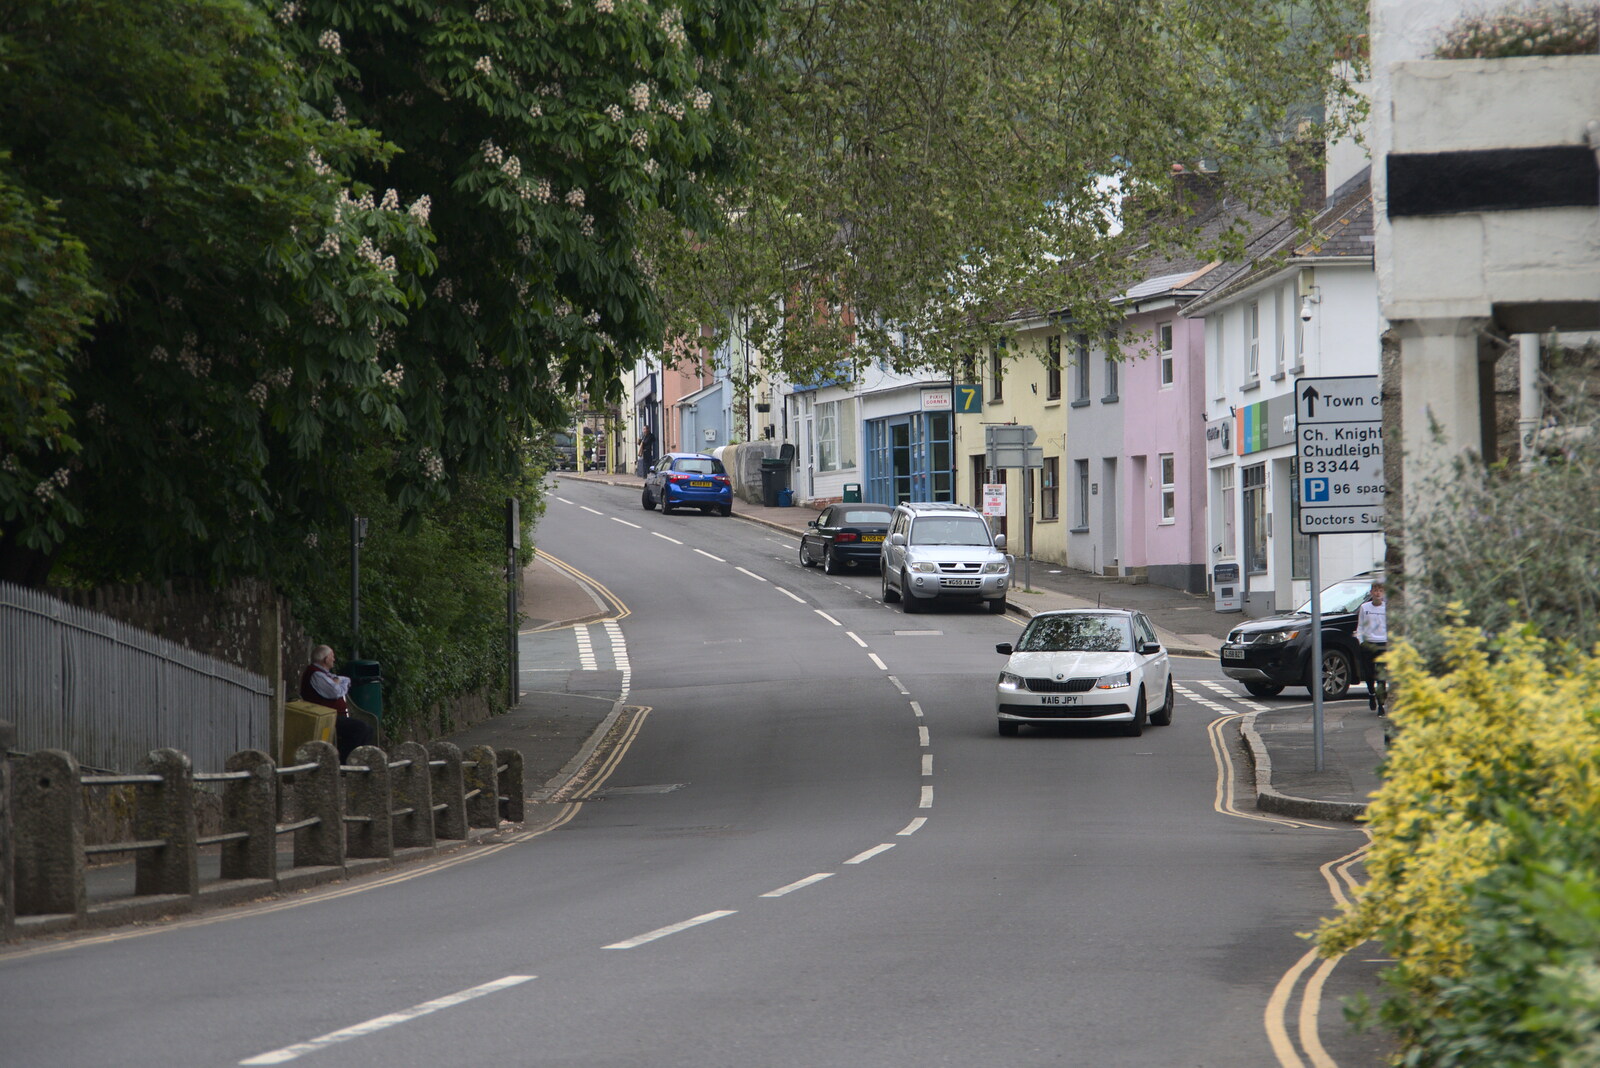 Bovey Tracey, near the Co-op from A Trip to Grandma J's, Spreyton, Devon - 2nd June 2021